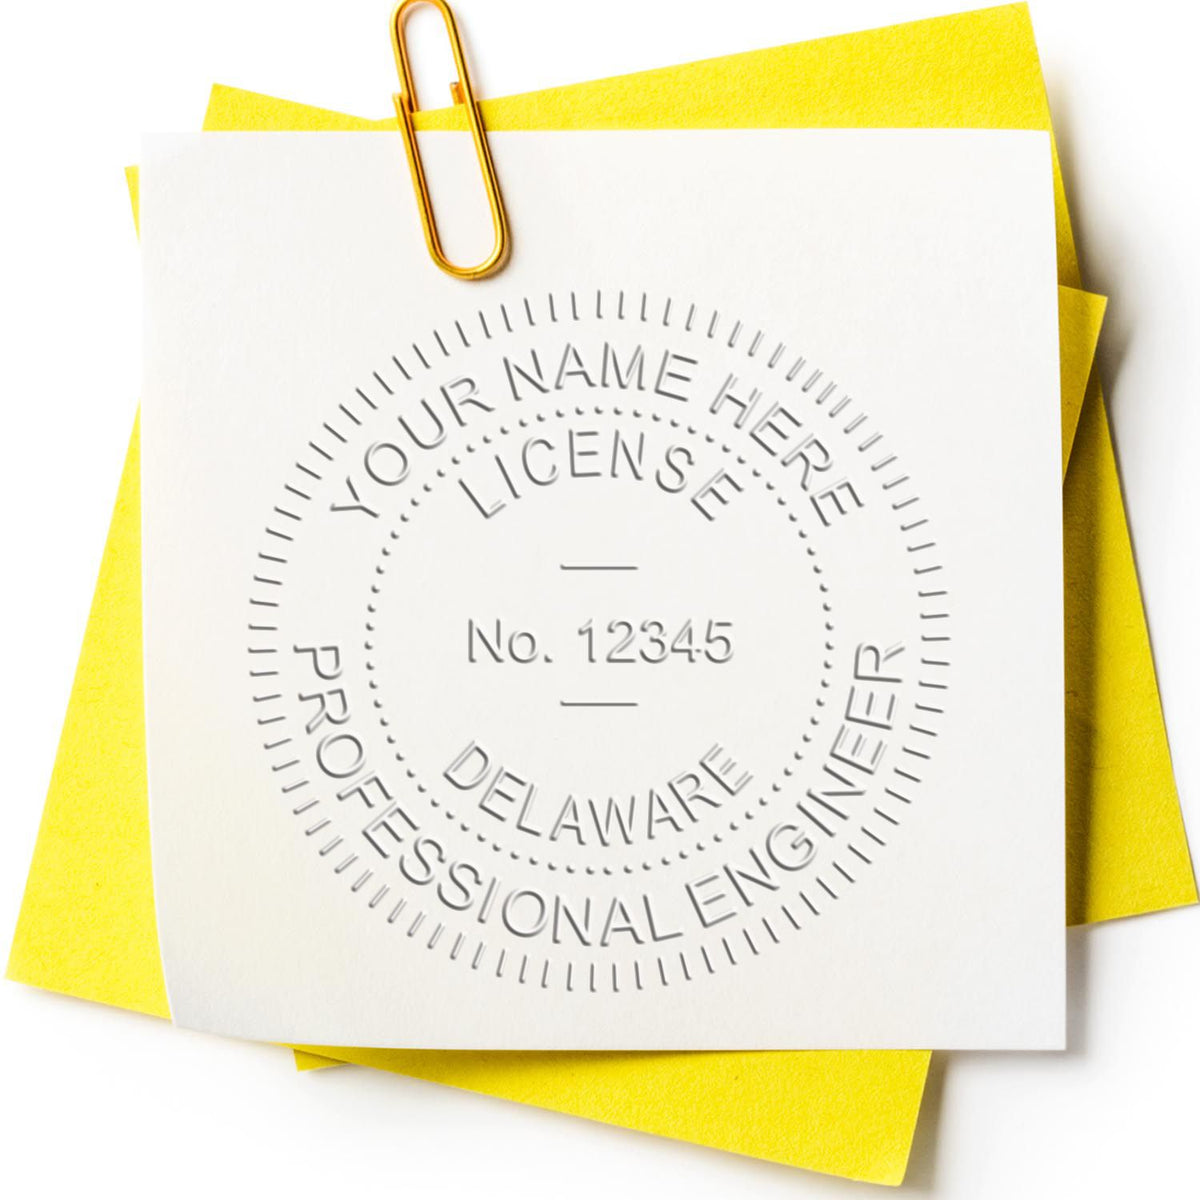 The Gift Delaware Engineer Seal stamp impression comes to life with a crisp, detailed image stamped on paper - showcasing true professional quality.